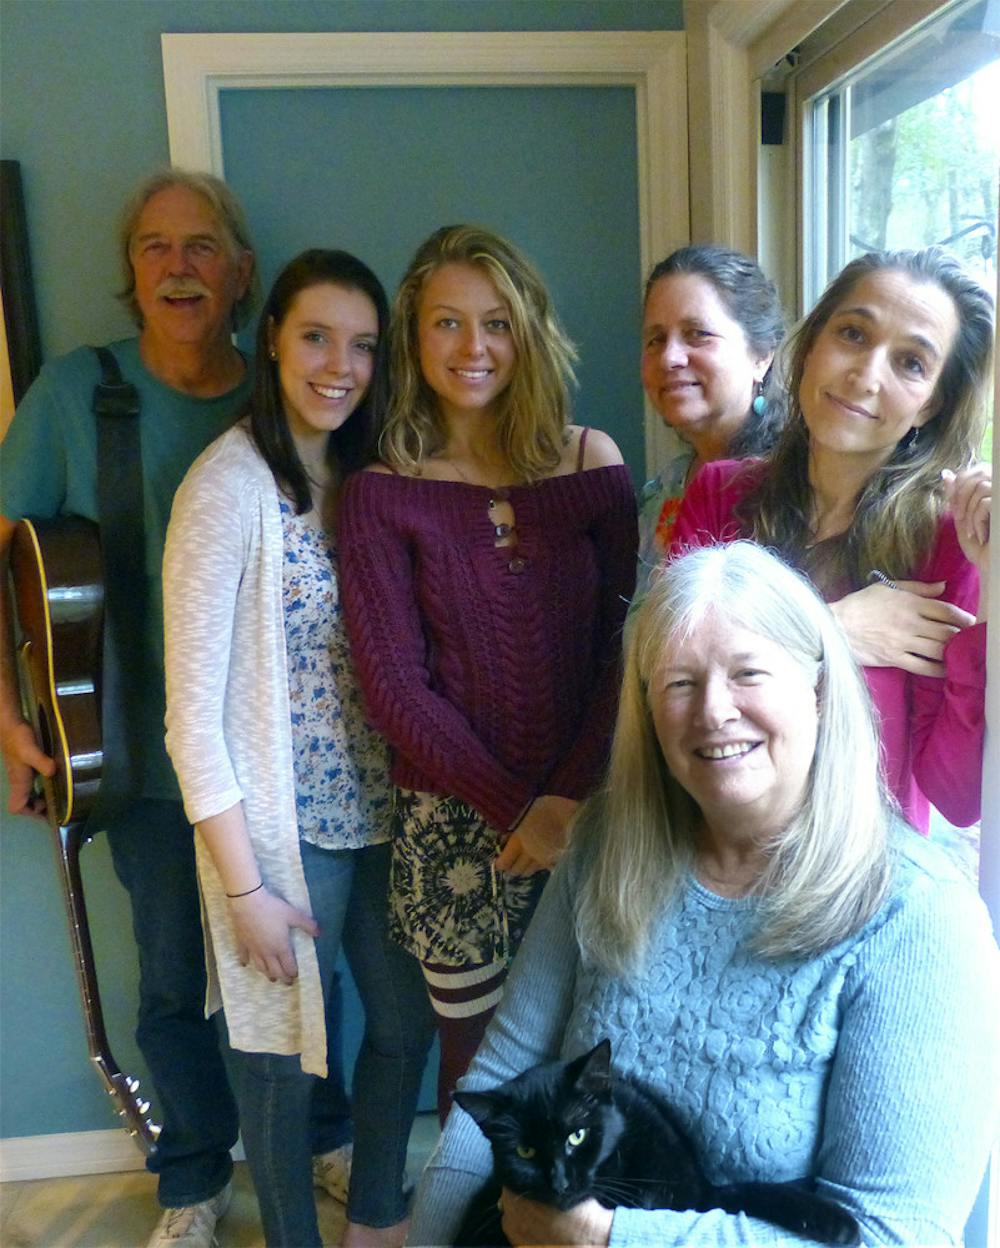 <p>From left: Local musicians Mike Boulware, Carolina Boulware, Maggie Rucker, Janet Rucker, Heather Hall and Cathy DeWitt (front) and others will be performing all of the songs from King’s album “Tapestry” at 7:30 p.m. in the Historic Thomas Center on Jan. 30, 2016.</p>